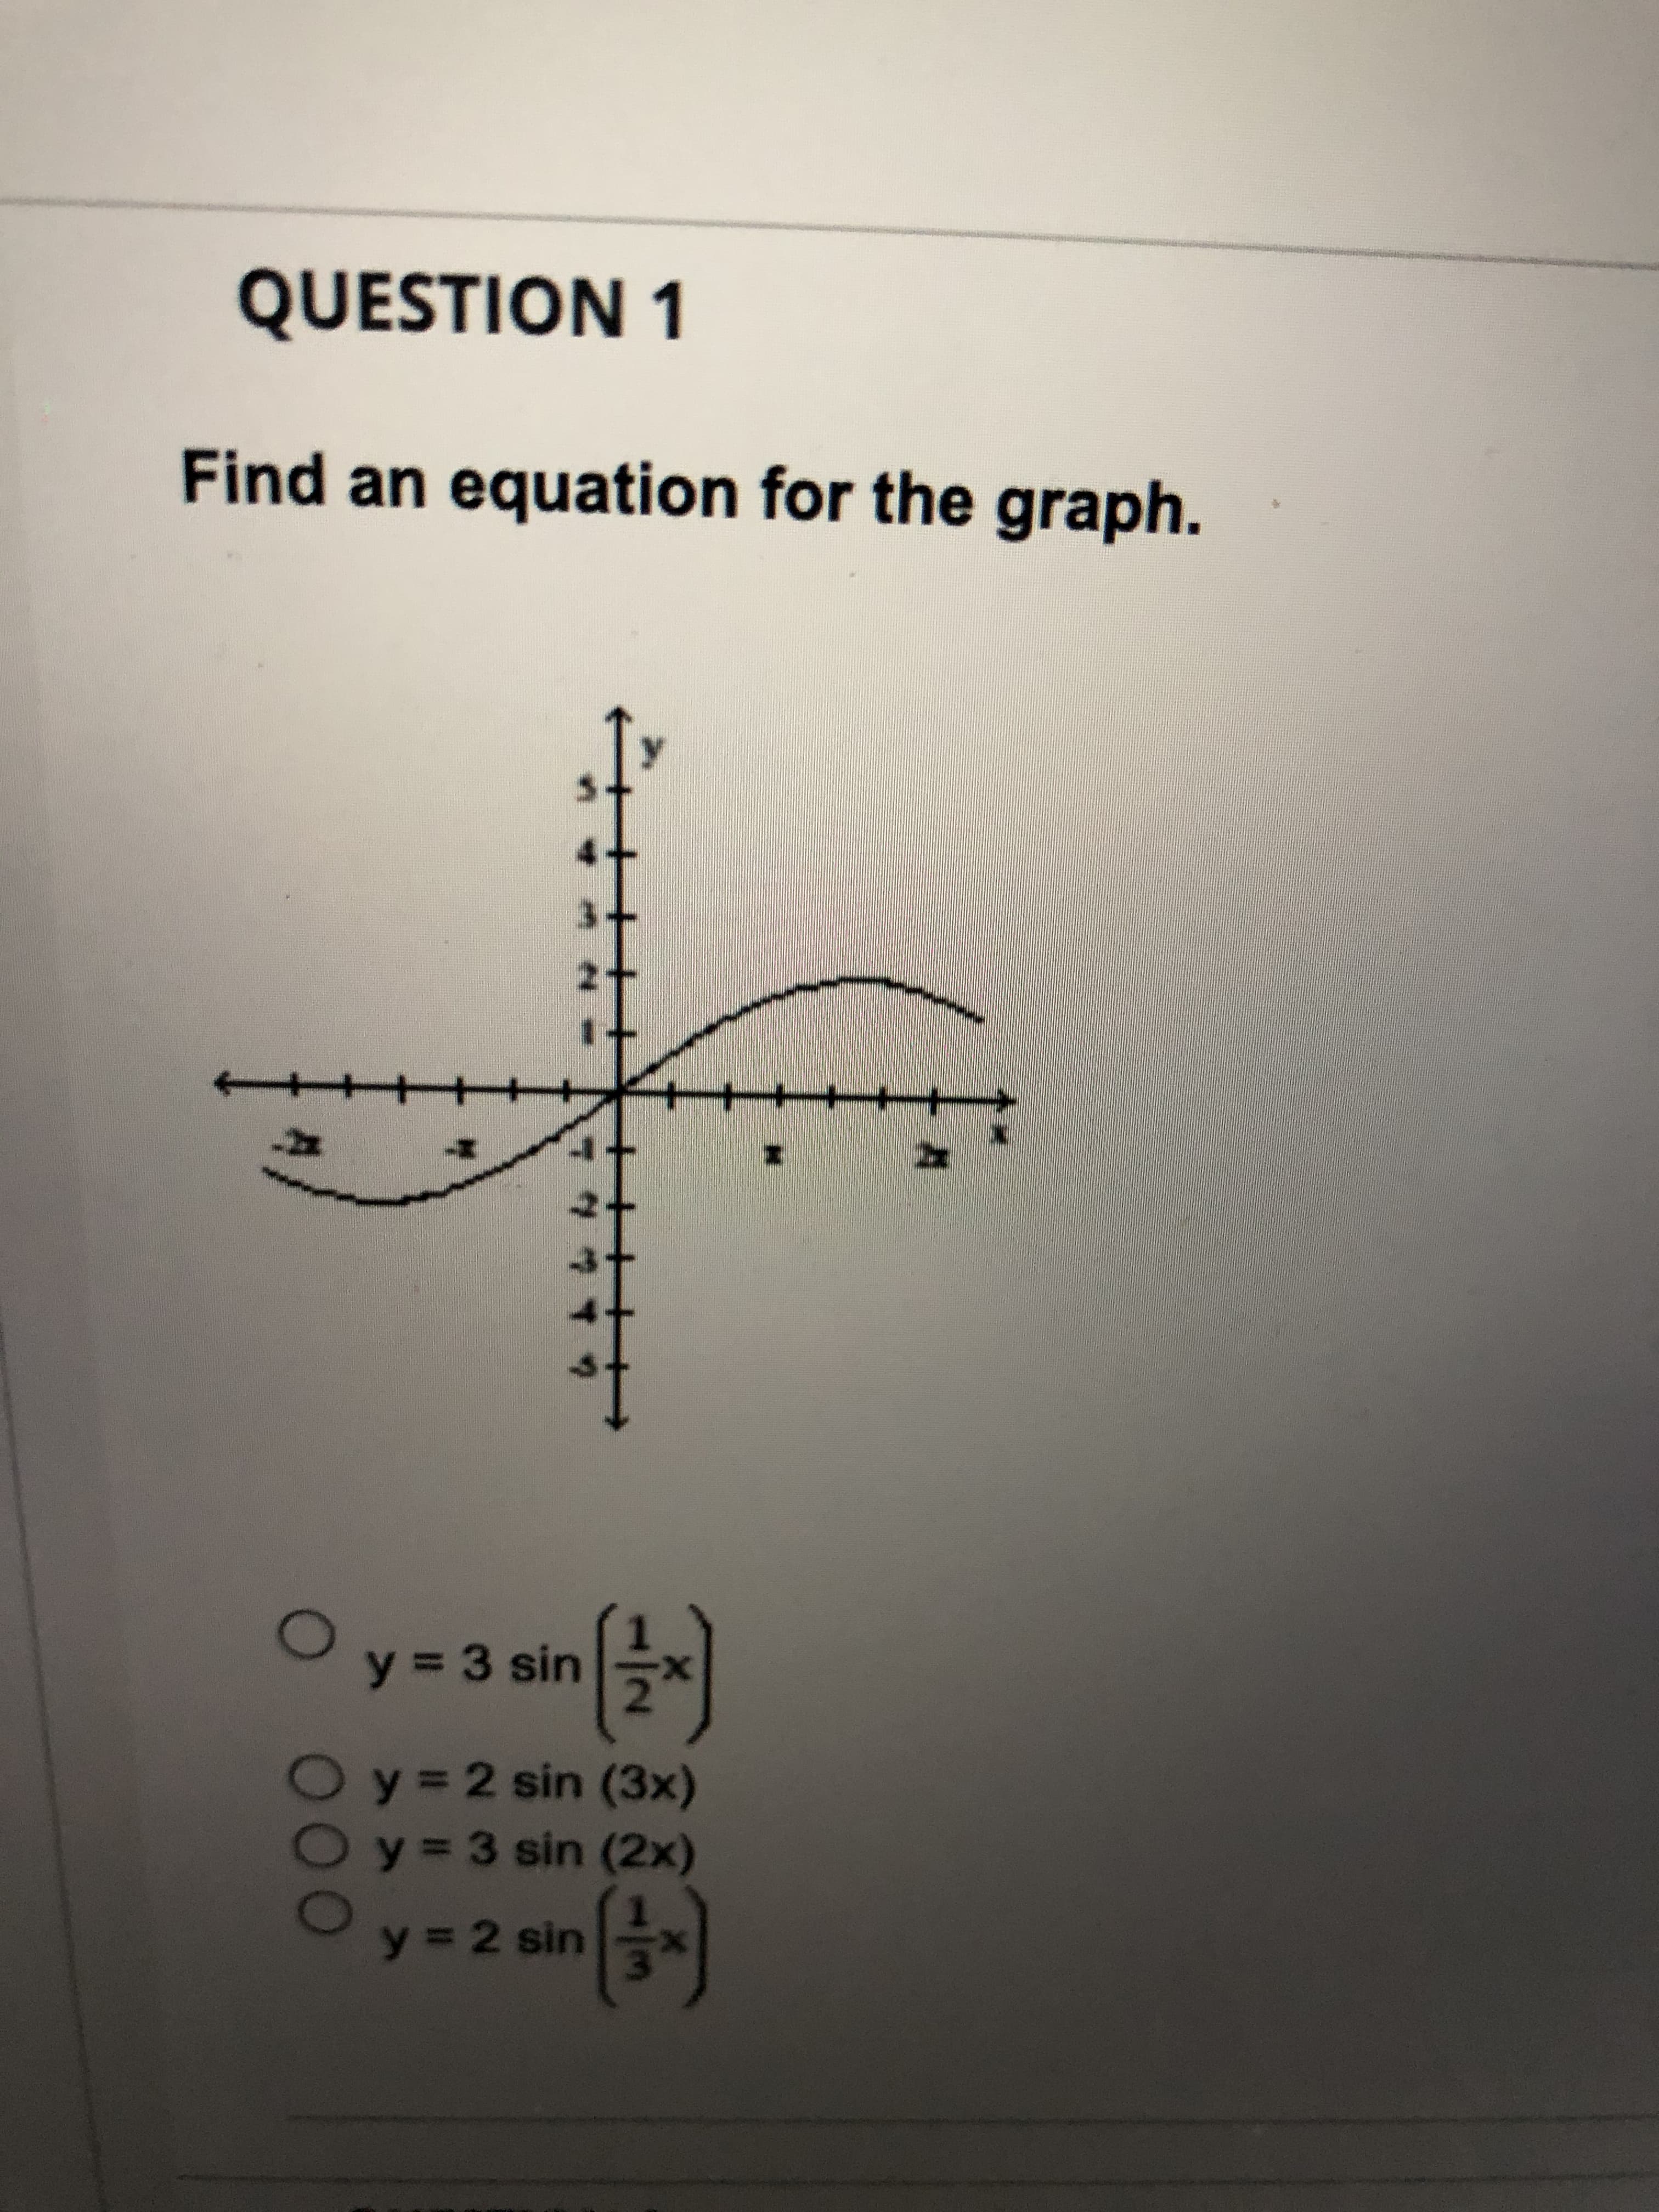 QUESTION 1
Find an equation for the graph.
十
y 3 sin
%3D
Oy32 sin (3x)
Oy33 sin (2x)
y 2 sin
(+)
